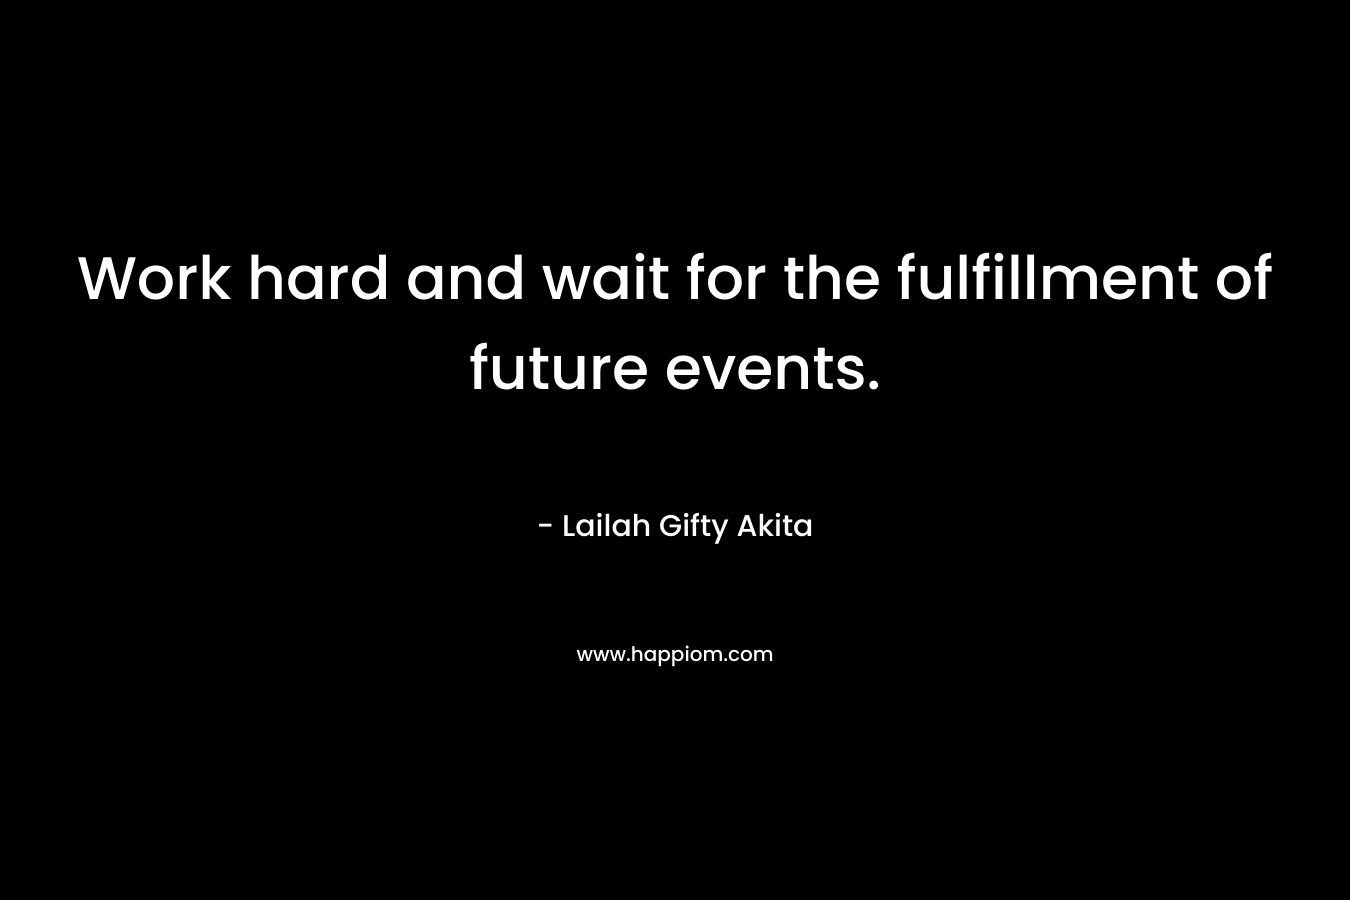 Work hard and wait for the fulfillment of future events.